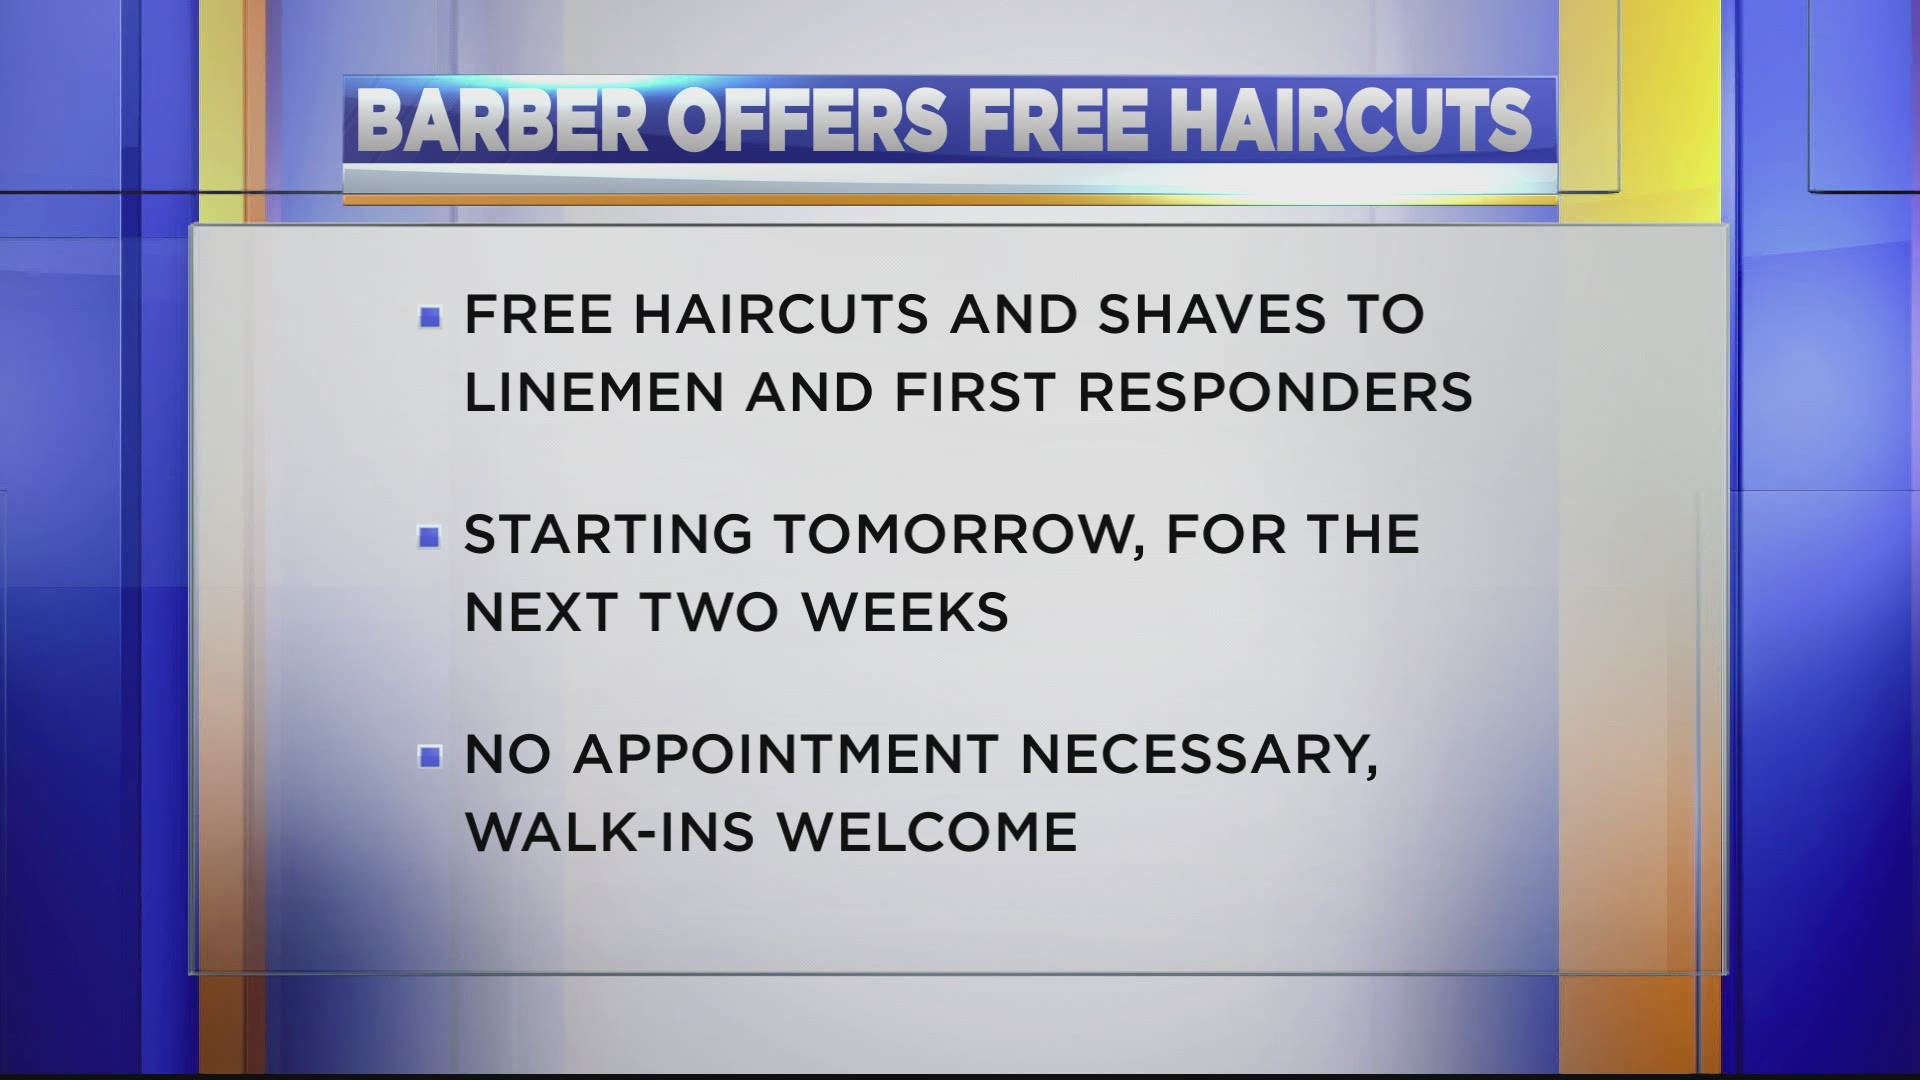 Hilltop Barbershop is offering the free haircuts as a sign of appreciation for those who worked to keep people safe during the winter storm in February.